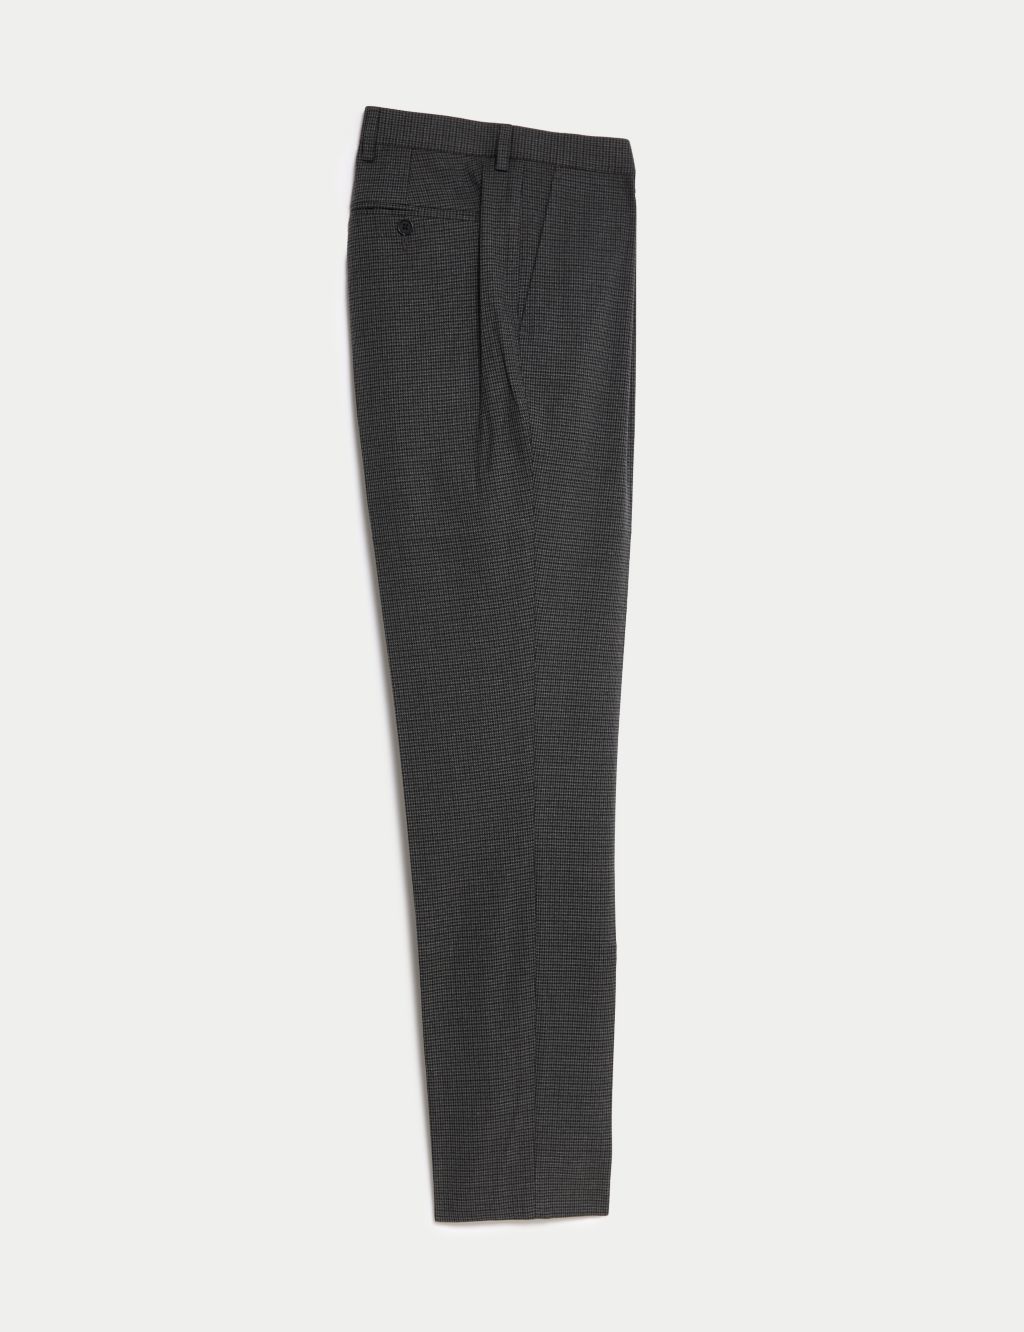 Textured Checked Stretch Trousers image 2